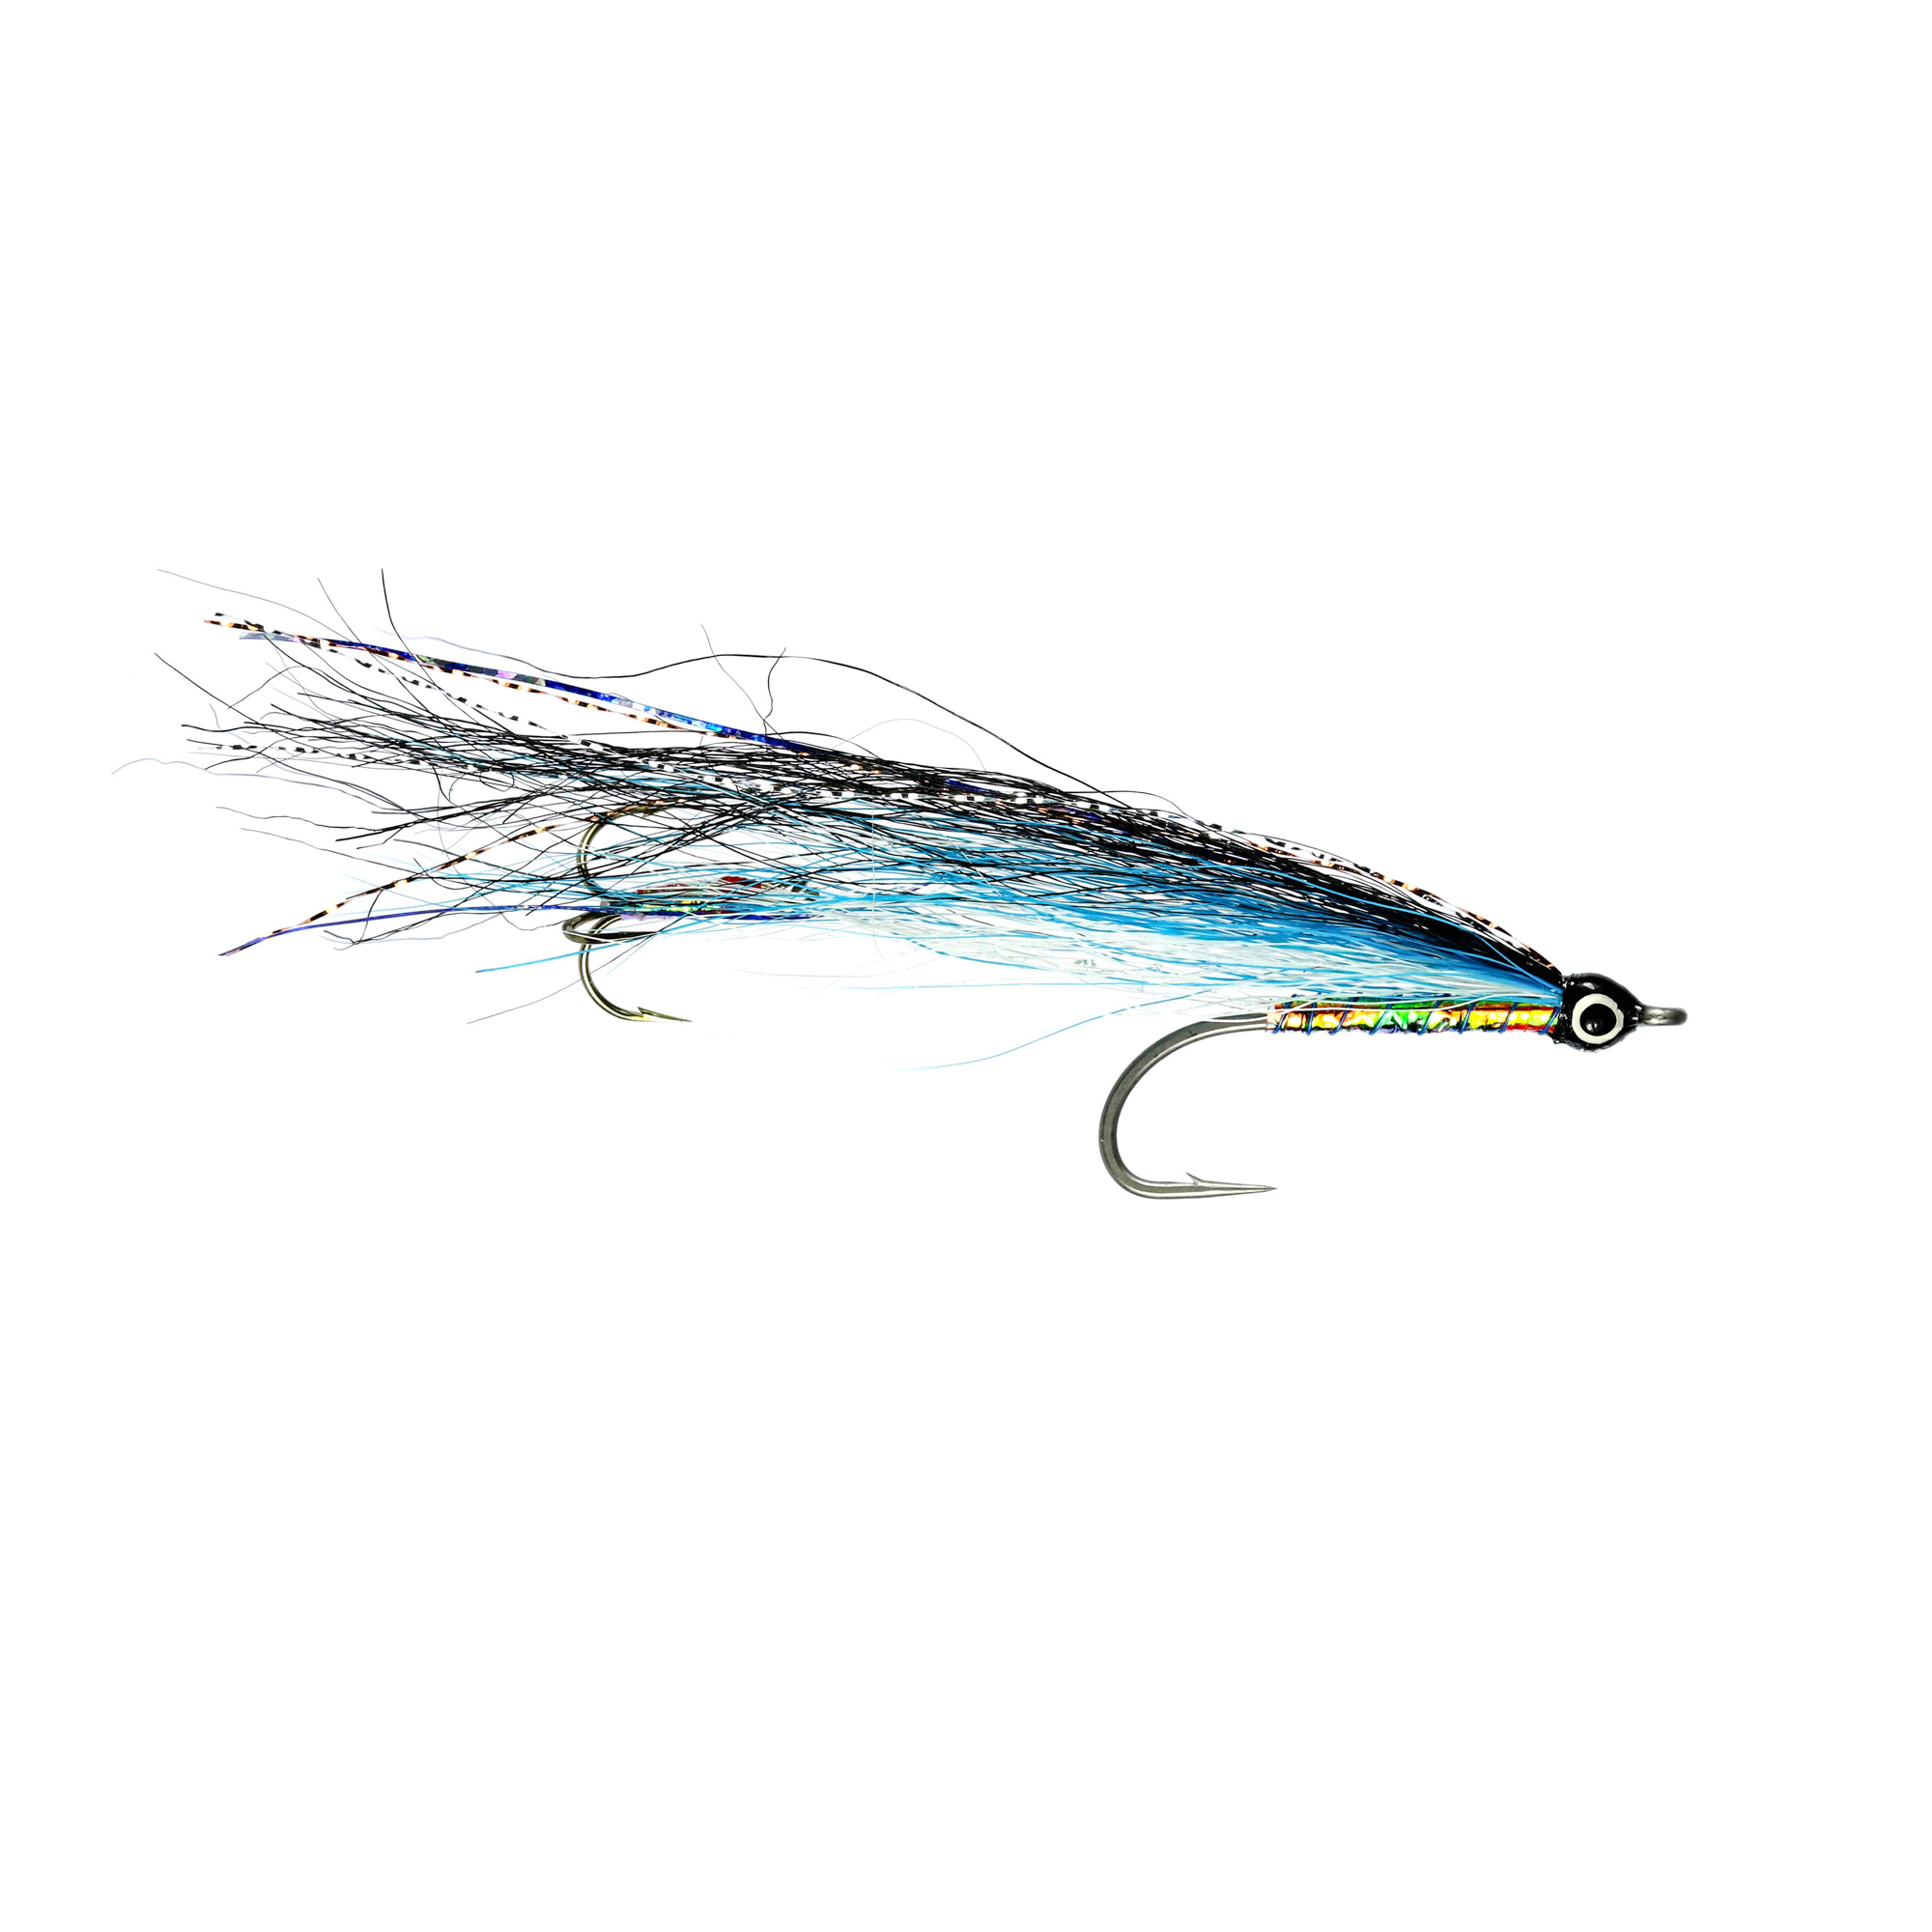 Caledonia Elver Sea Trout Special – Guide Flyfishing, Fly Fishing Rods,  Reels, Sage, Redington, RIO